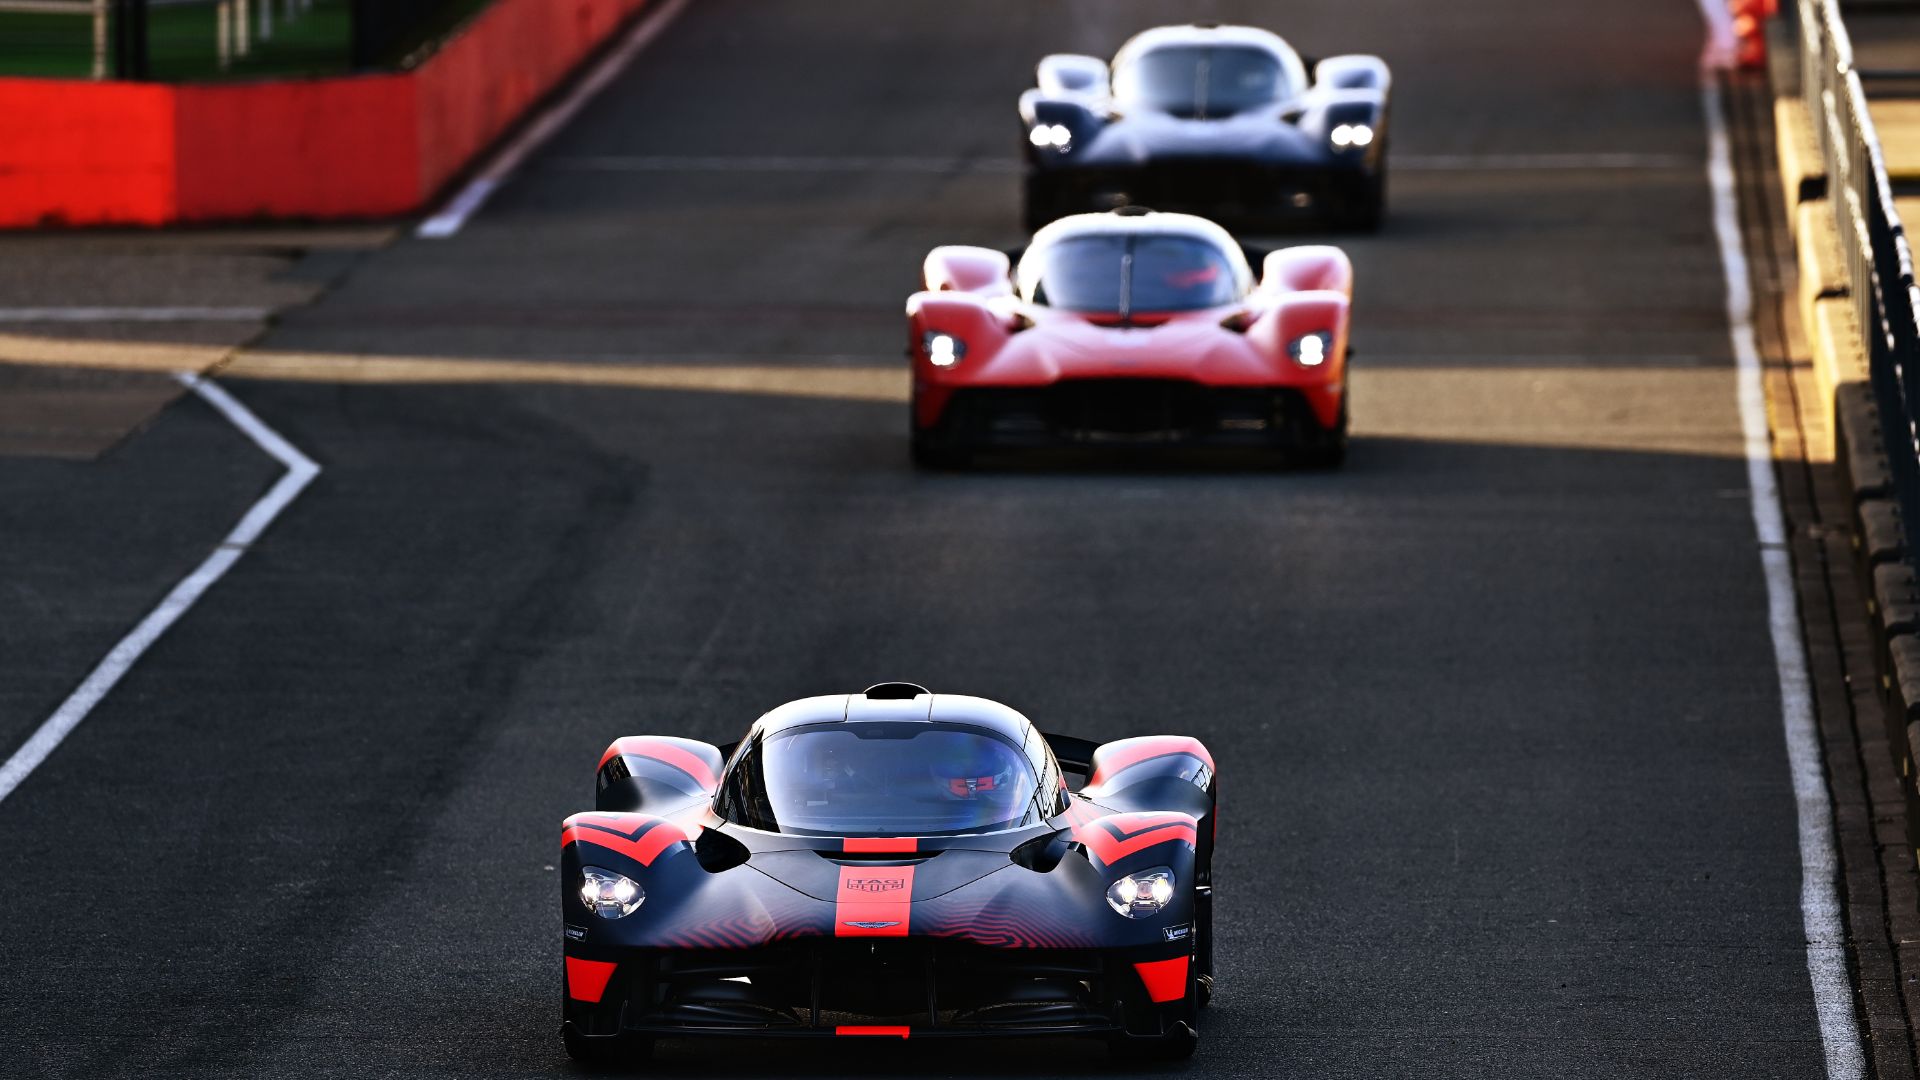 Aston Martin Valkyrie prototypes tested by F1 drivers at Silverstone